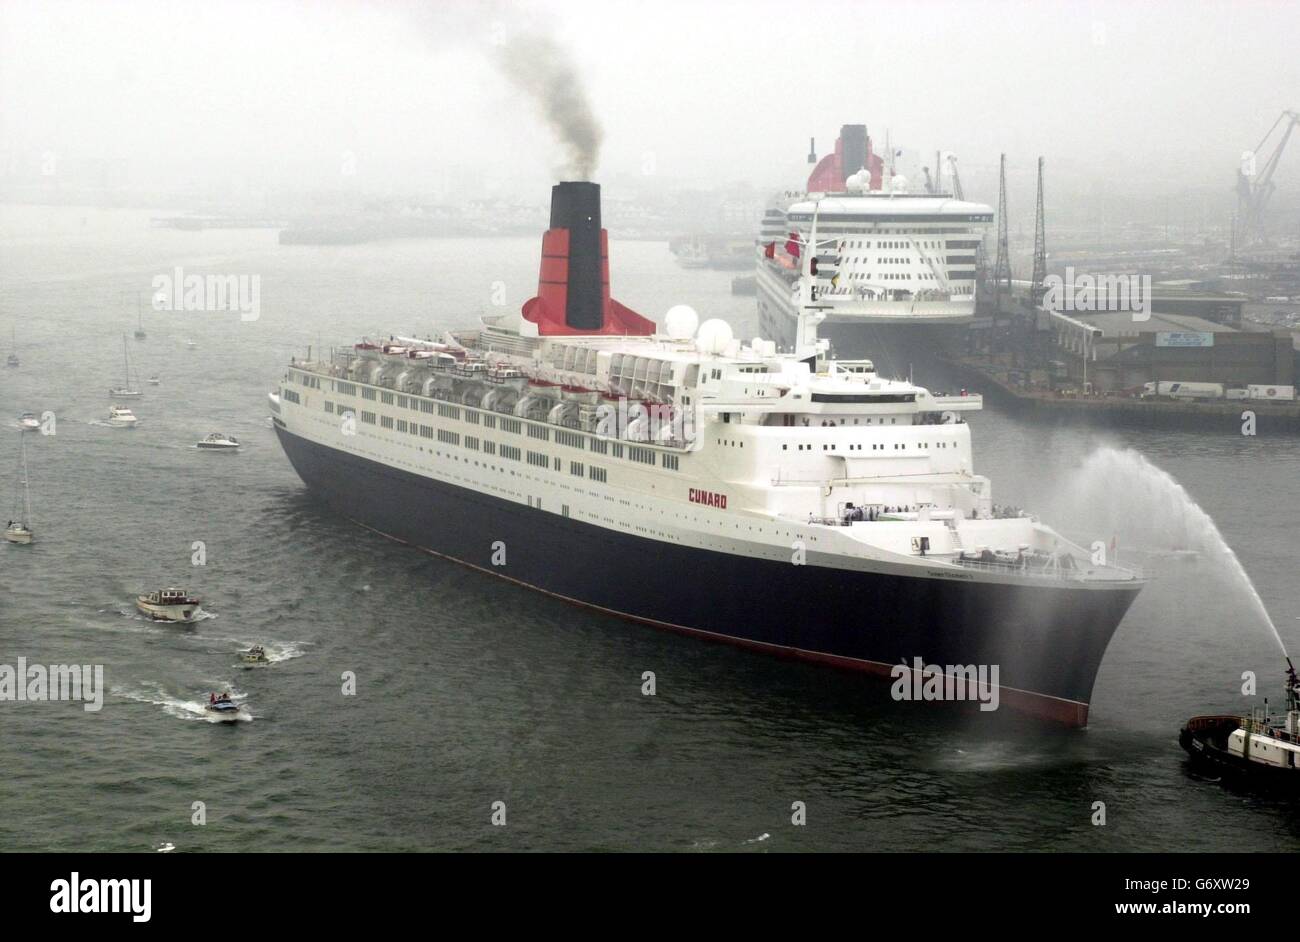 The QE2 passing the QM2 at Southampton. The end of an era in cruising was being marked today in a ceremony involving the QE2 and Cunard's new superliner the 150,000-tonne Queen Mary 2 (QM2). At the ceremony, attended by Deputy Prime Minister John Prescott, Cunard's flagship status was being passed from the 35-year-old QE2 to the 540 million QM2 which was officially named by the Queen in January this year. Stock Photo